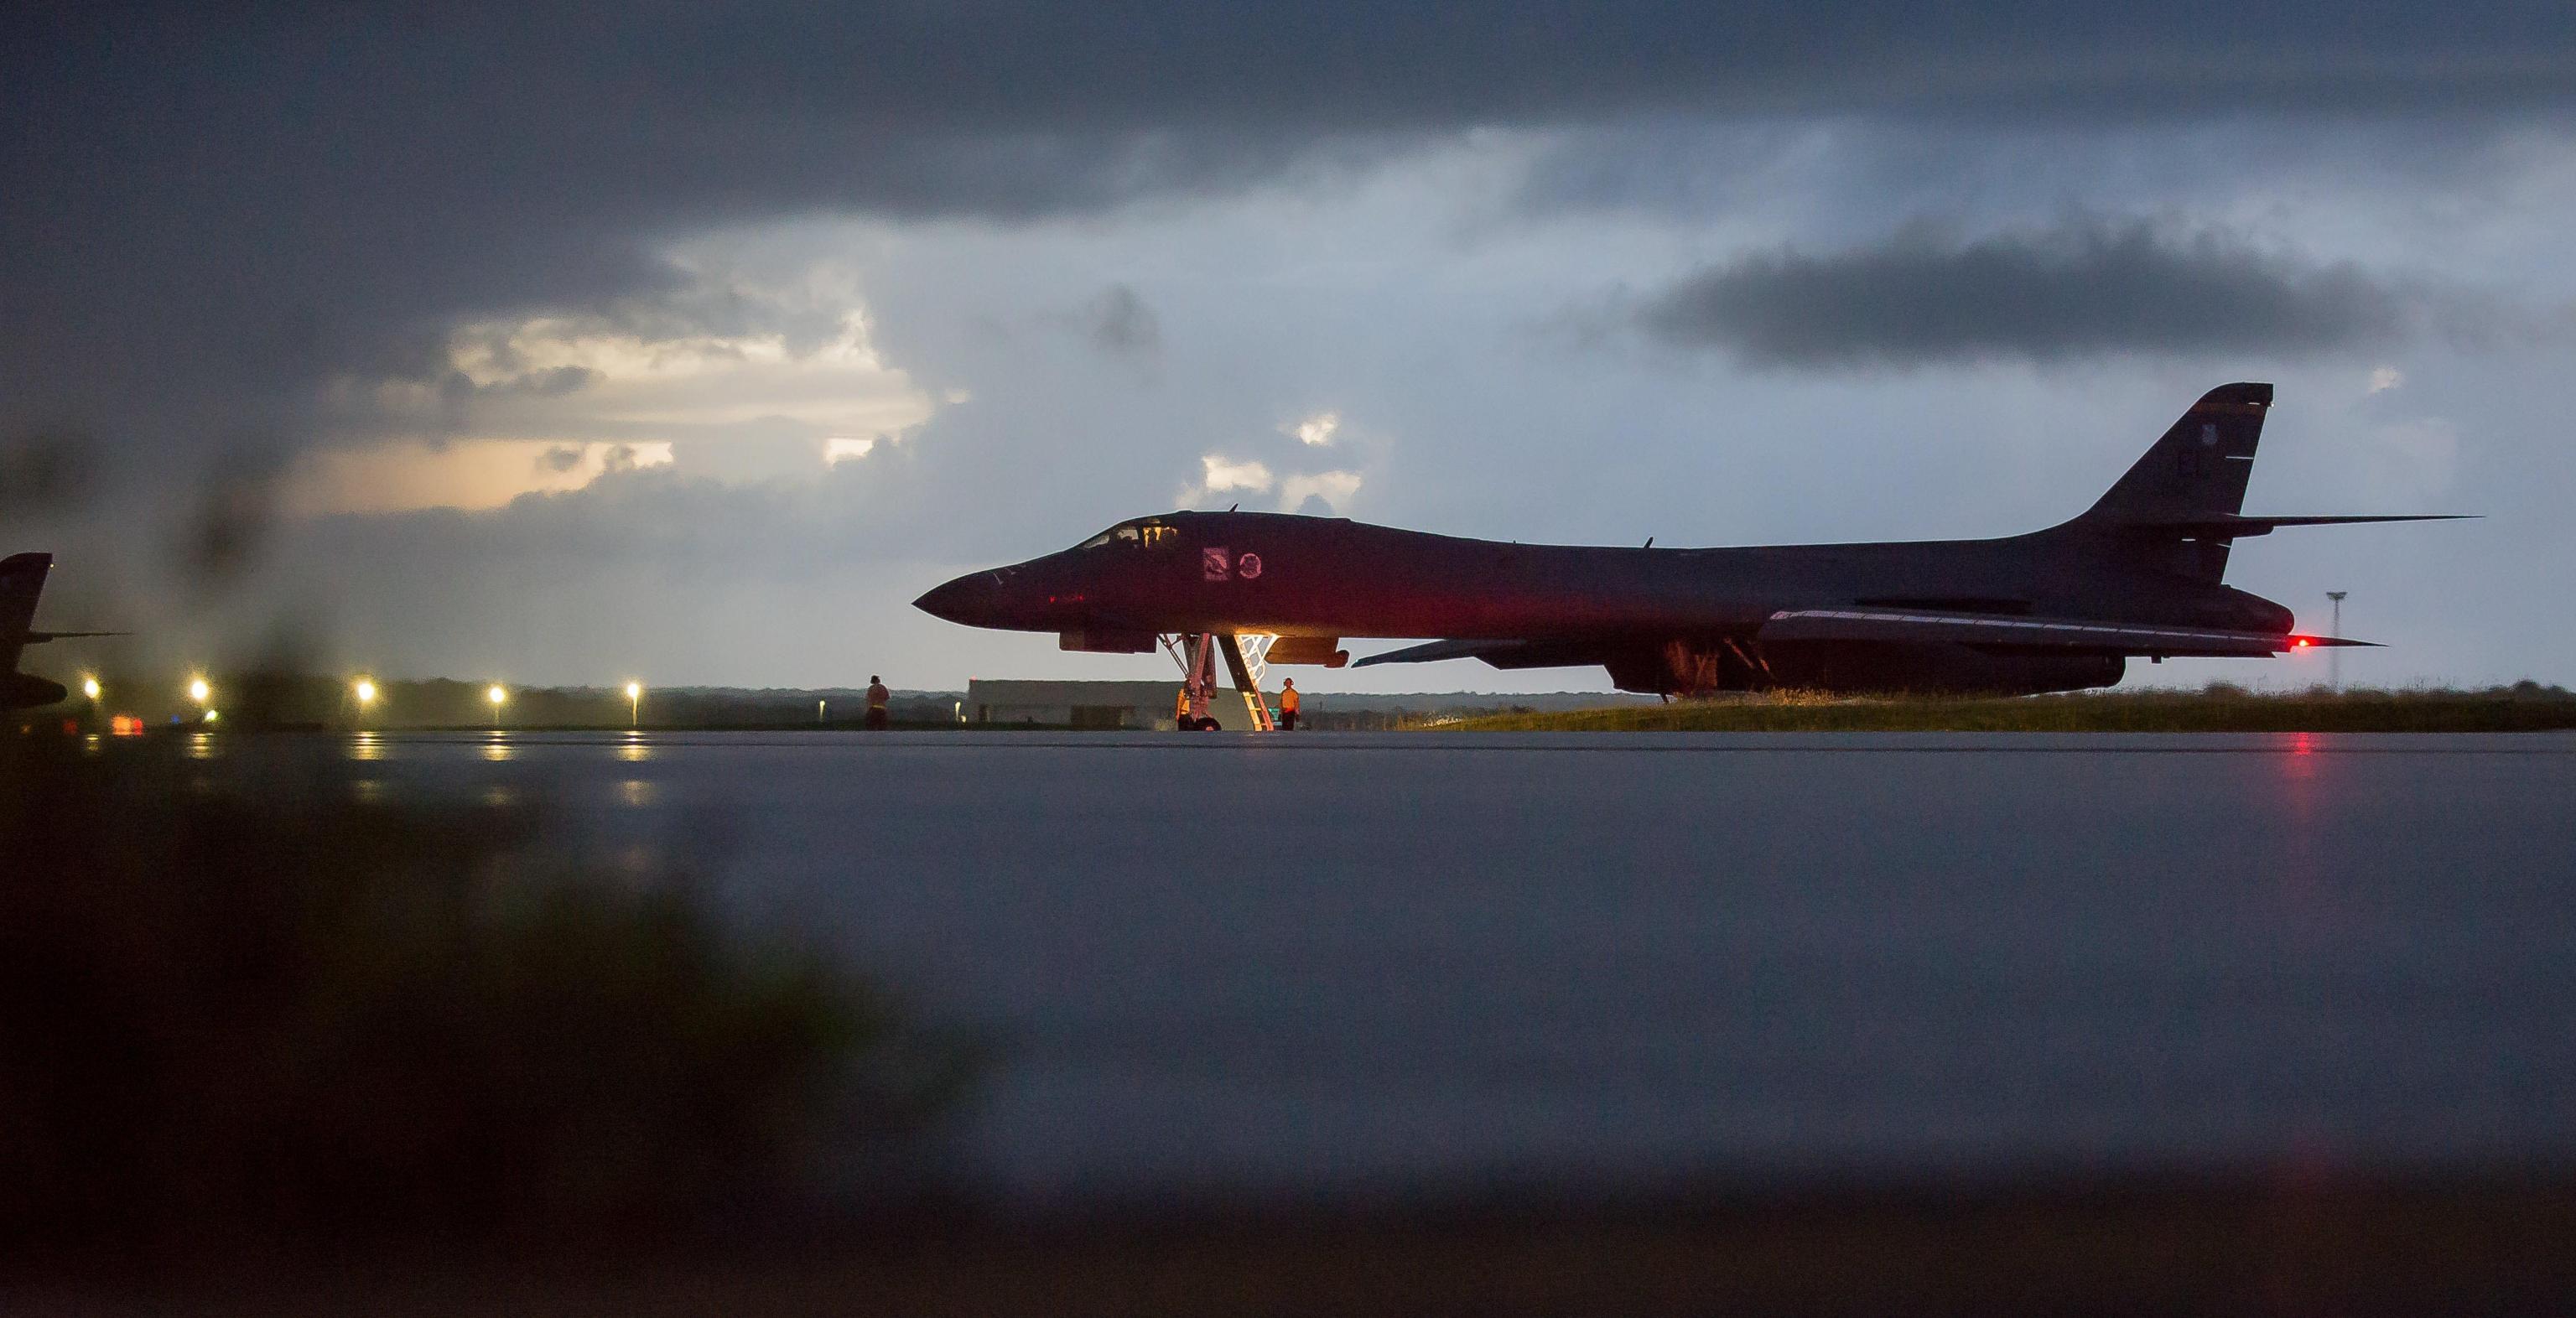 A handout photo made available by the US Air Force shows a US Air Force B-1B Lancer, assigned to the 37th Expeditionary Bomb Squadron, deployed from Ellsworth Air Force Base, South Dakota, prepares to take off from Andersen AFB, Guam, 23 September 2017. According to the US Air Force, its B-1B Lancer bombers from Guam and US Air Force F-15C Eagle fighter escorts from Okinawa, Japan, flew in international airspace over waters east of North Korea.  ANSA/SGT. JOSHUA SMOOT/US AIR FORCE HANDOUT  HANDOUT EDITORIAL USE ONLY/NO SALES